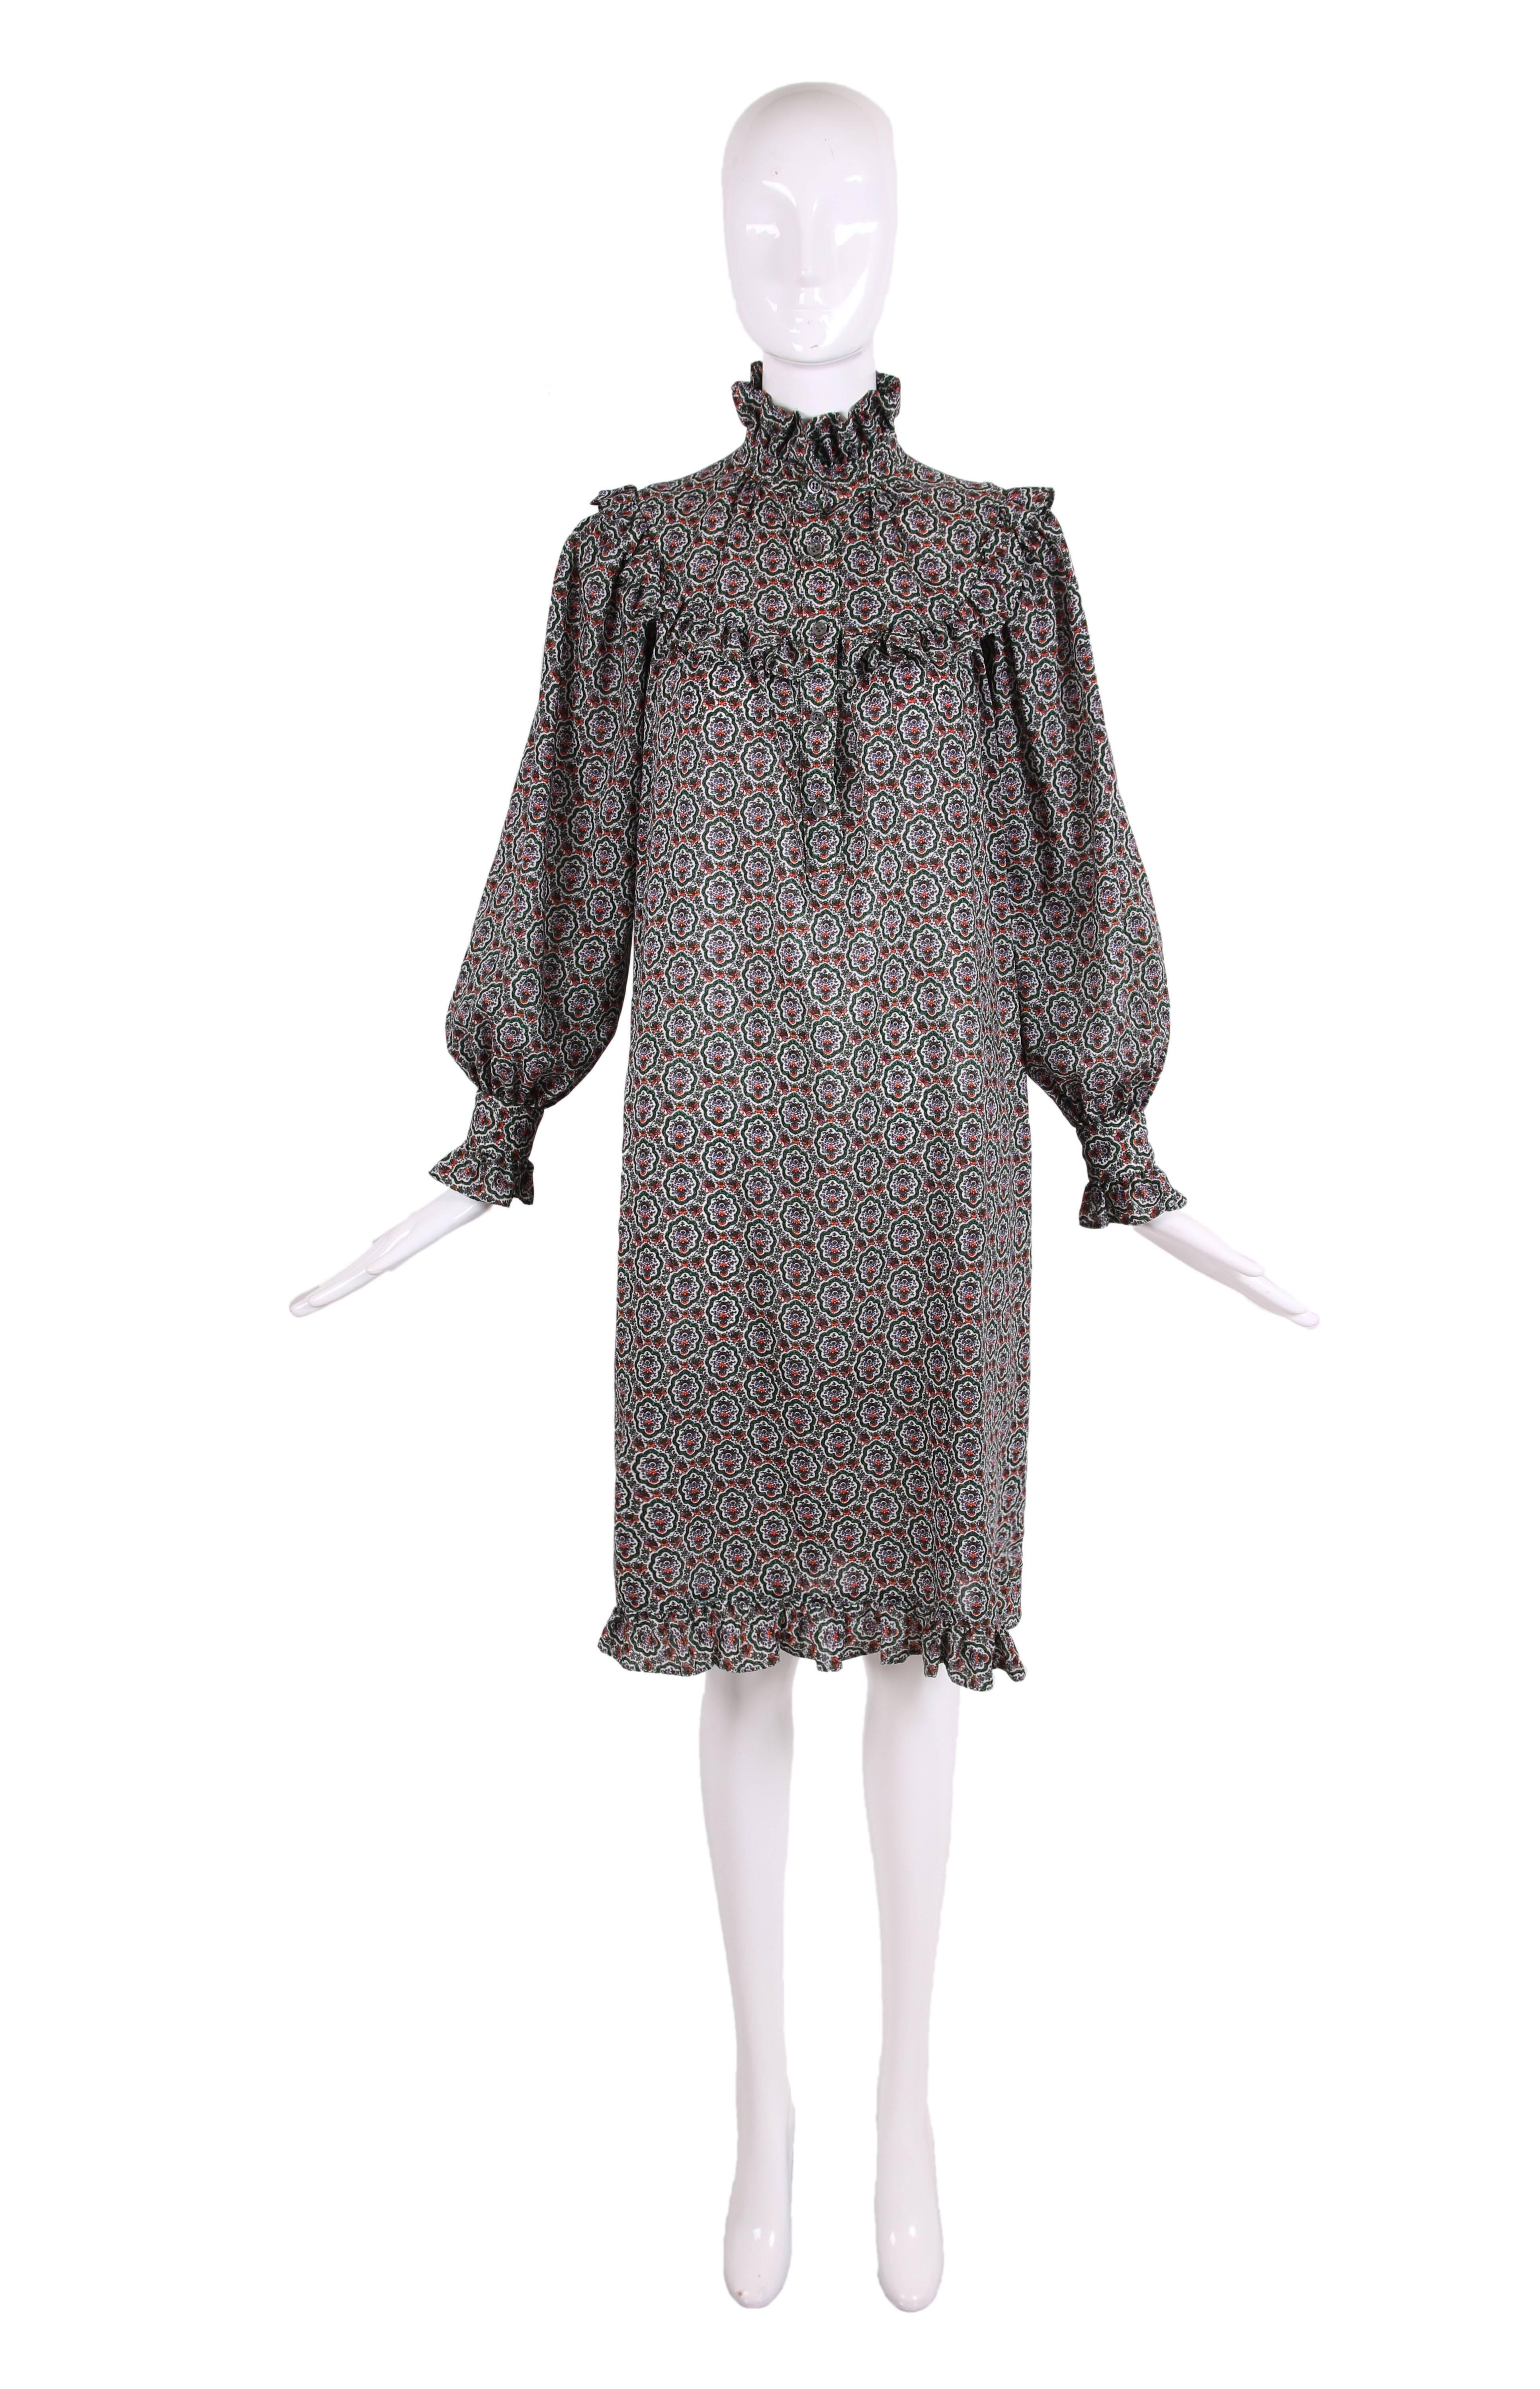 1970's Yves Saint Laurent classic peasant or smock dress in a light weight wool featuring a multi-colored floral print, hidden side pockets and ruffle trim at neck, smock edge, sleeve cuffs and hem. Button closures at center front bodice to the